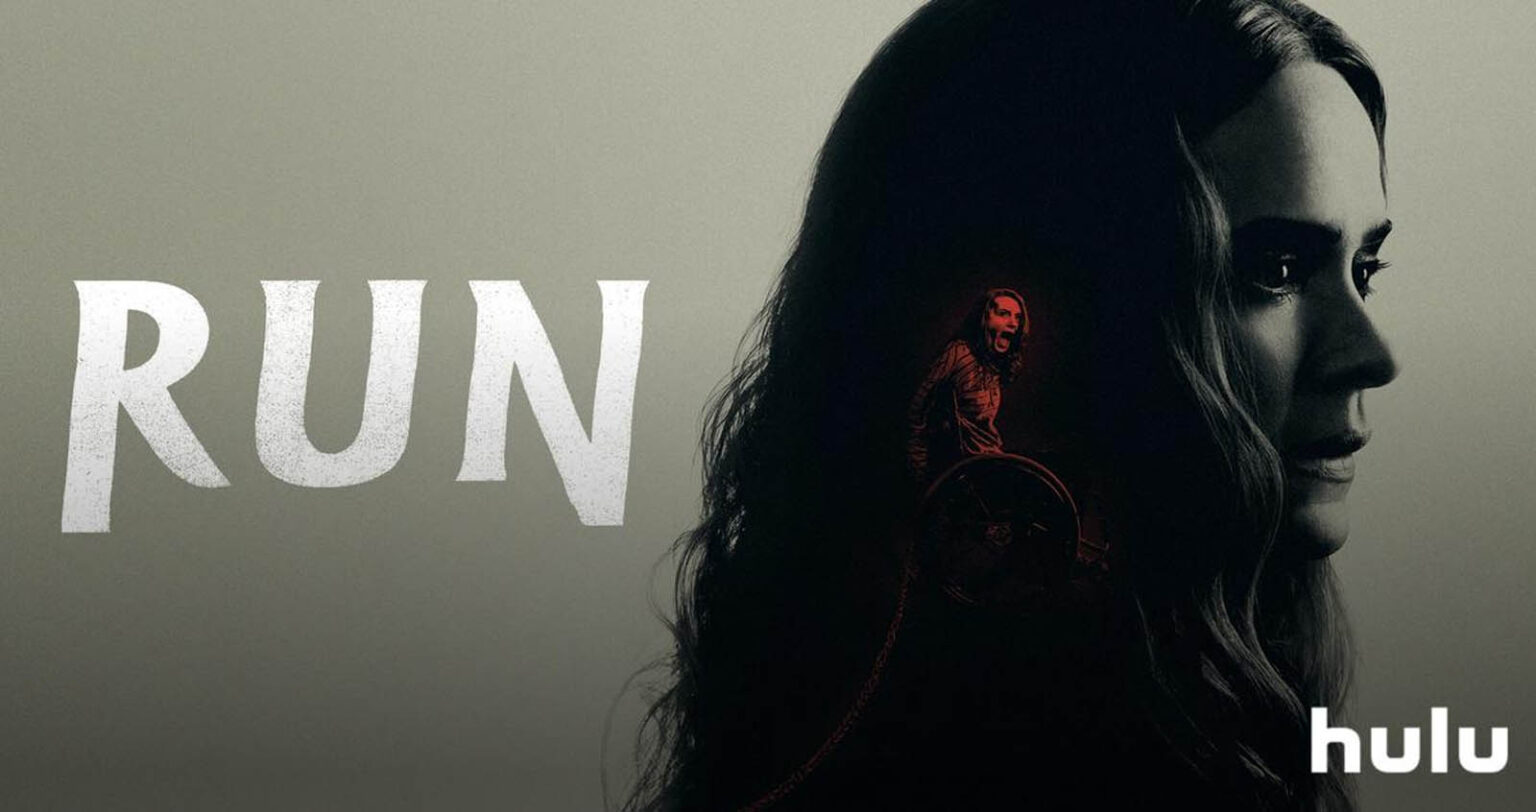 'RUN' has become the most-watched original film on Hulu in the first week of its release. Get a good understanding of the movie with the ending explained.